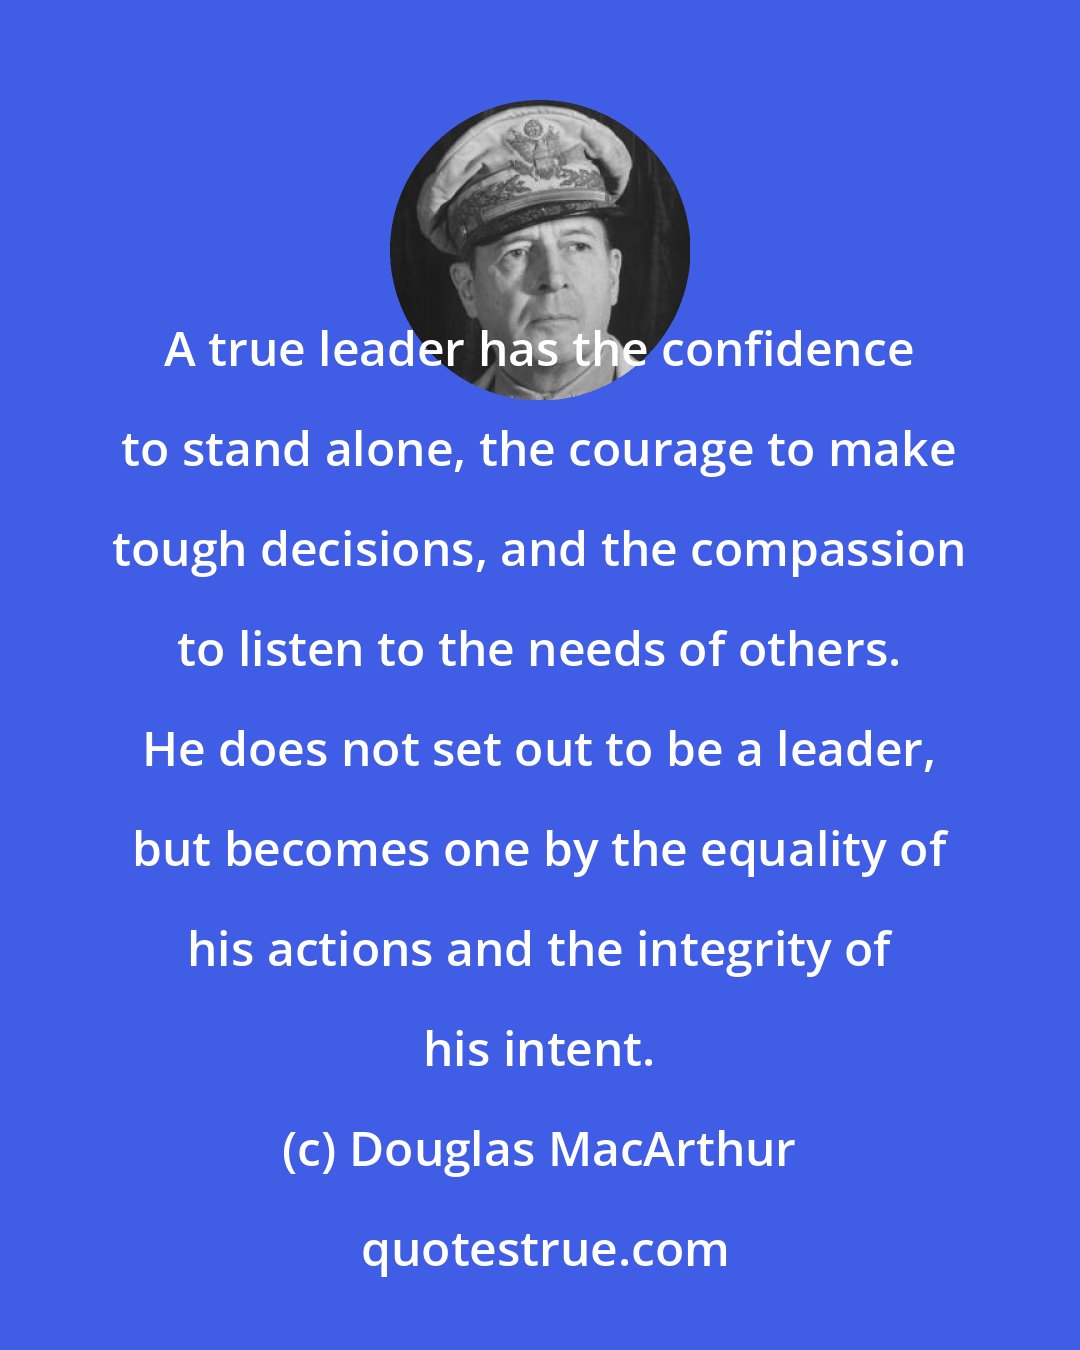 Douglas MacArthur: A true leader has the confidence to stand alone, the courage to make tough decisions, and the compassion to listen to the needs of others. He does not set out to be a leader, but becomes one by the equality of his actions and the integrity of his intent.